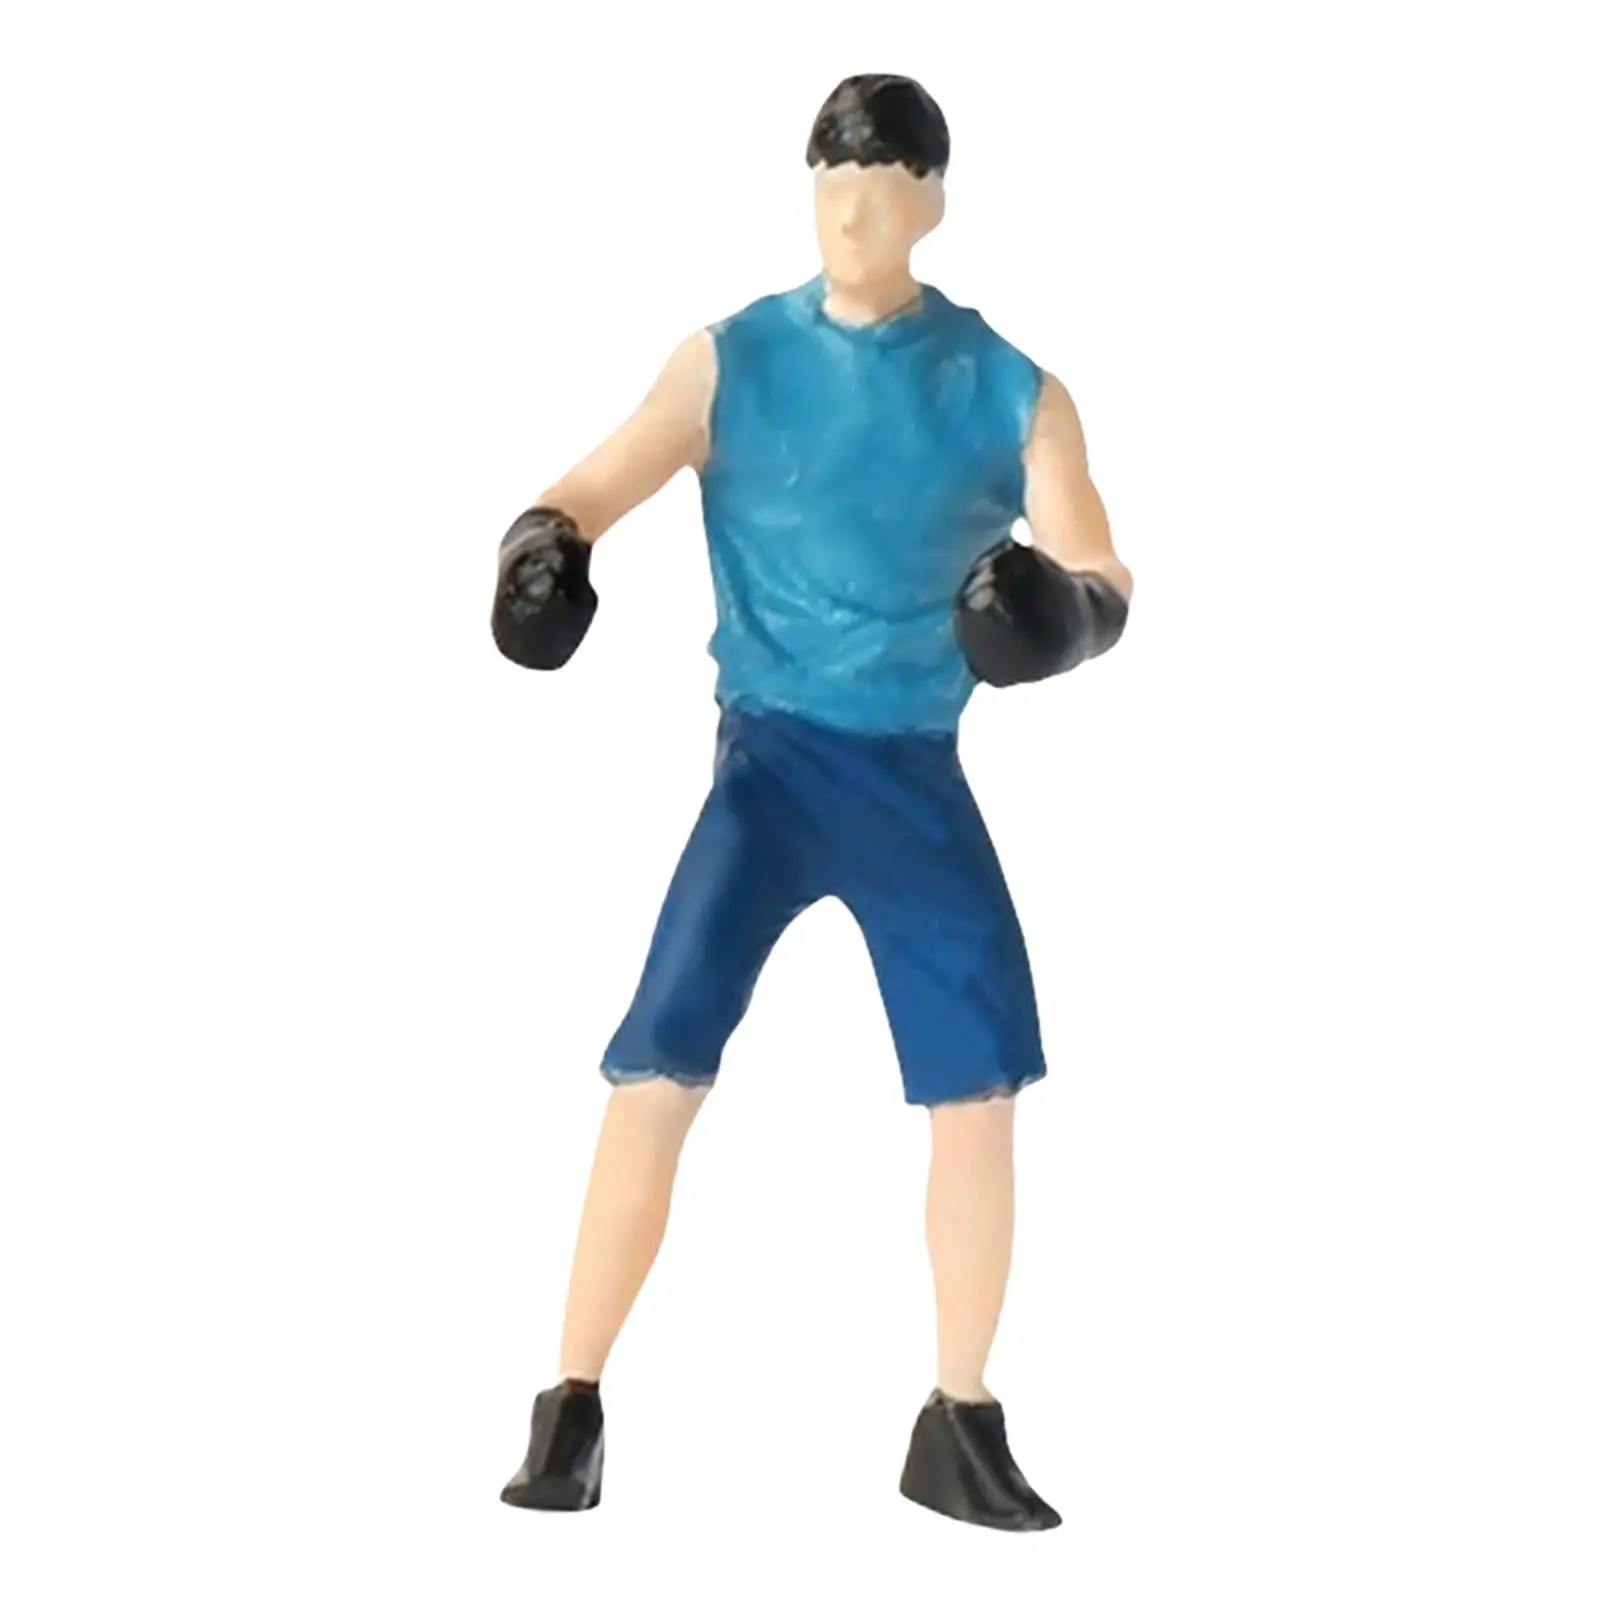 Simulation 1:64 Figures Boxing Man People Figures Resin Collection Mini Model for Photography Props Diorama Layout Decoration